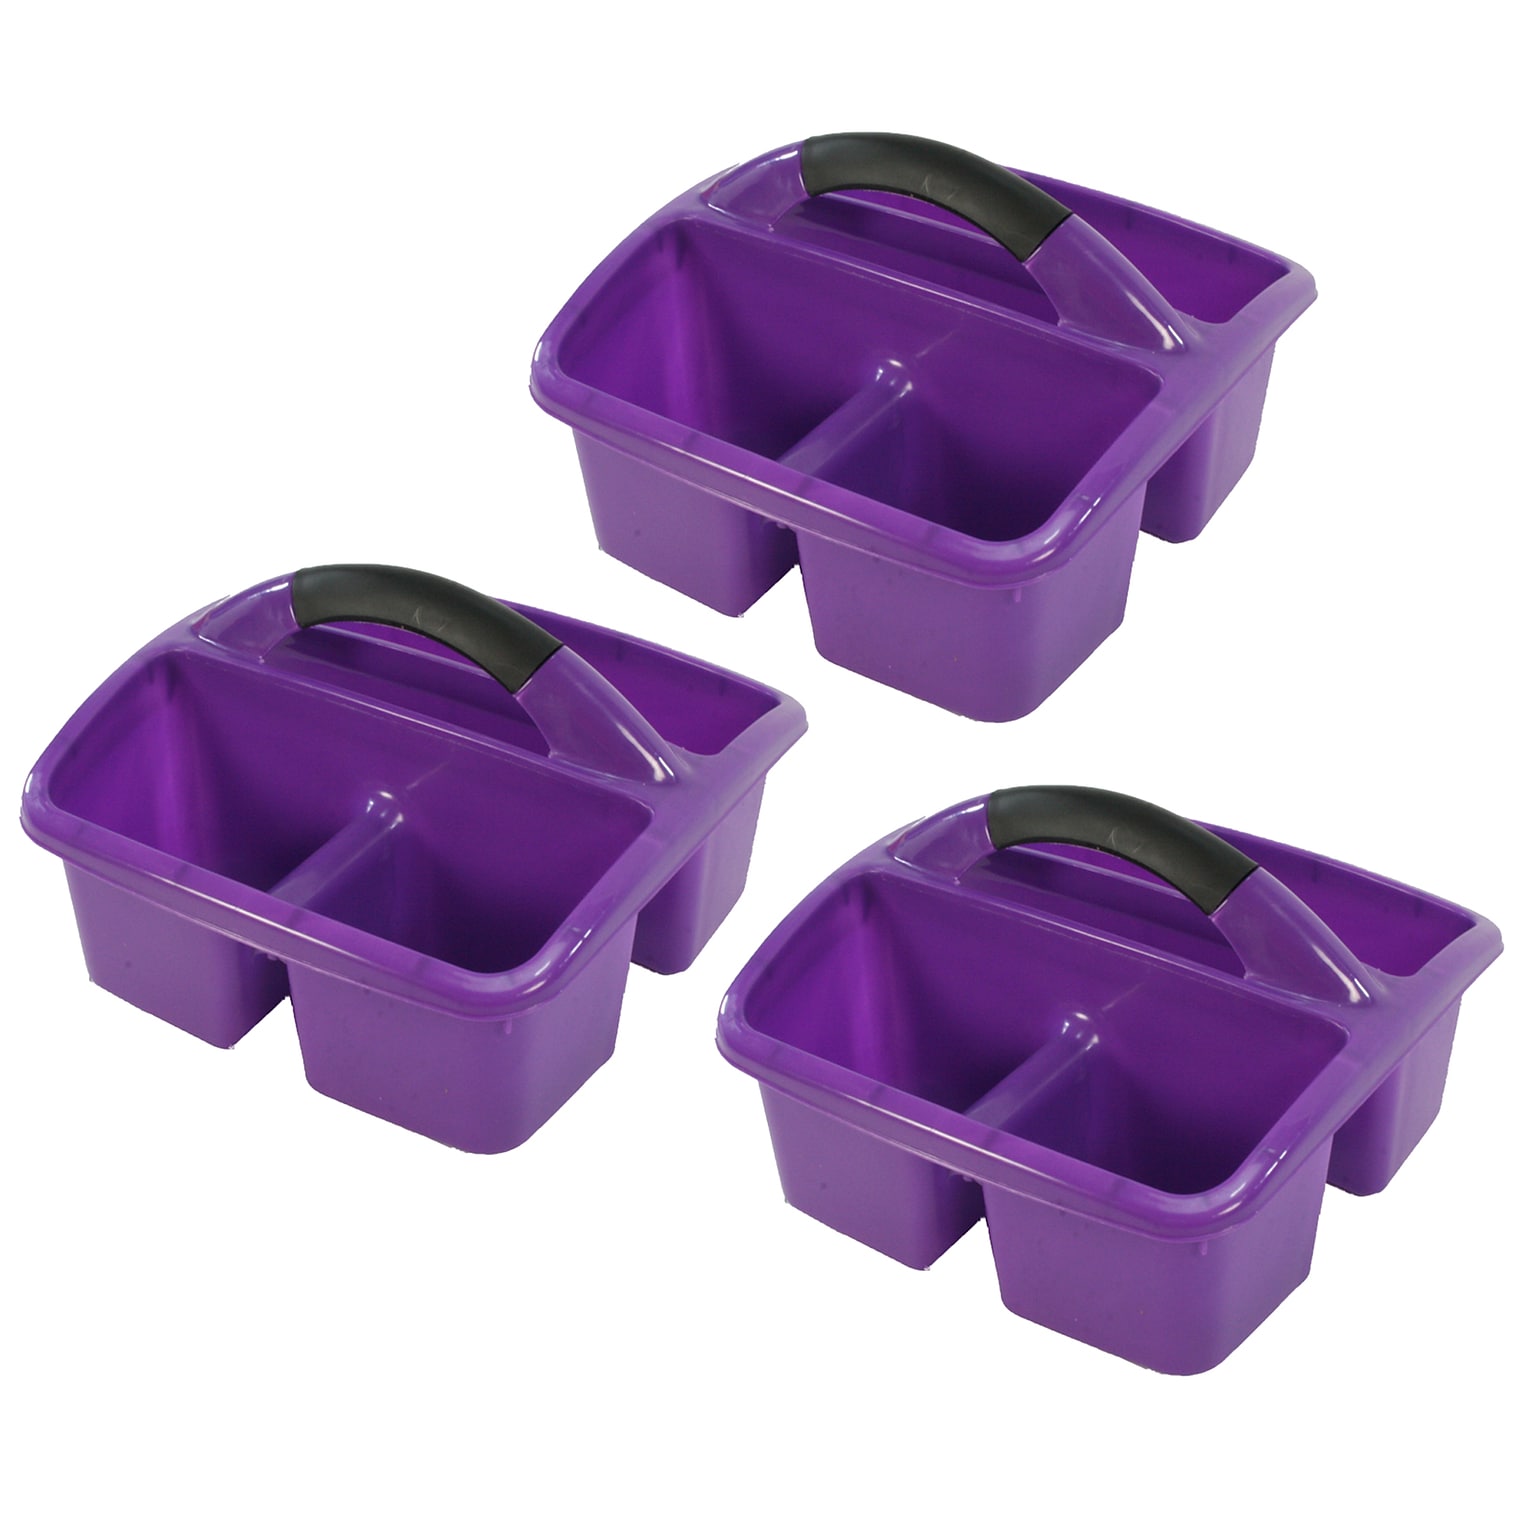 Romanoff Polypropylene Deluxe Small Utility Caddy, 9.5 x 9.5 x 6.5, Purple, Pack of 3 (ROM26906-3)